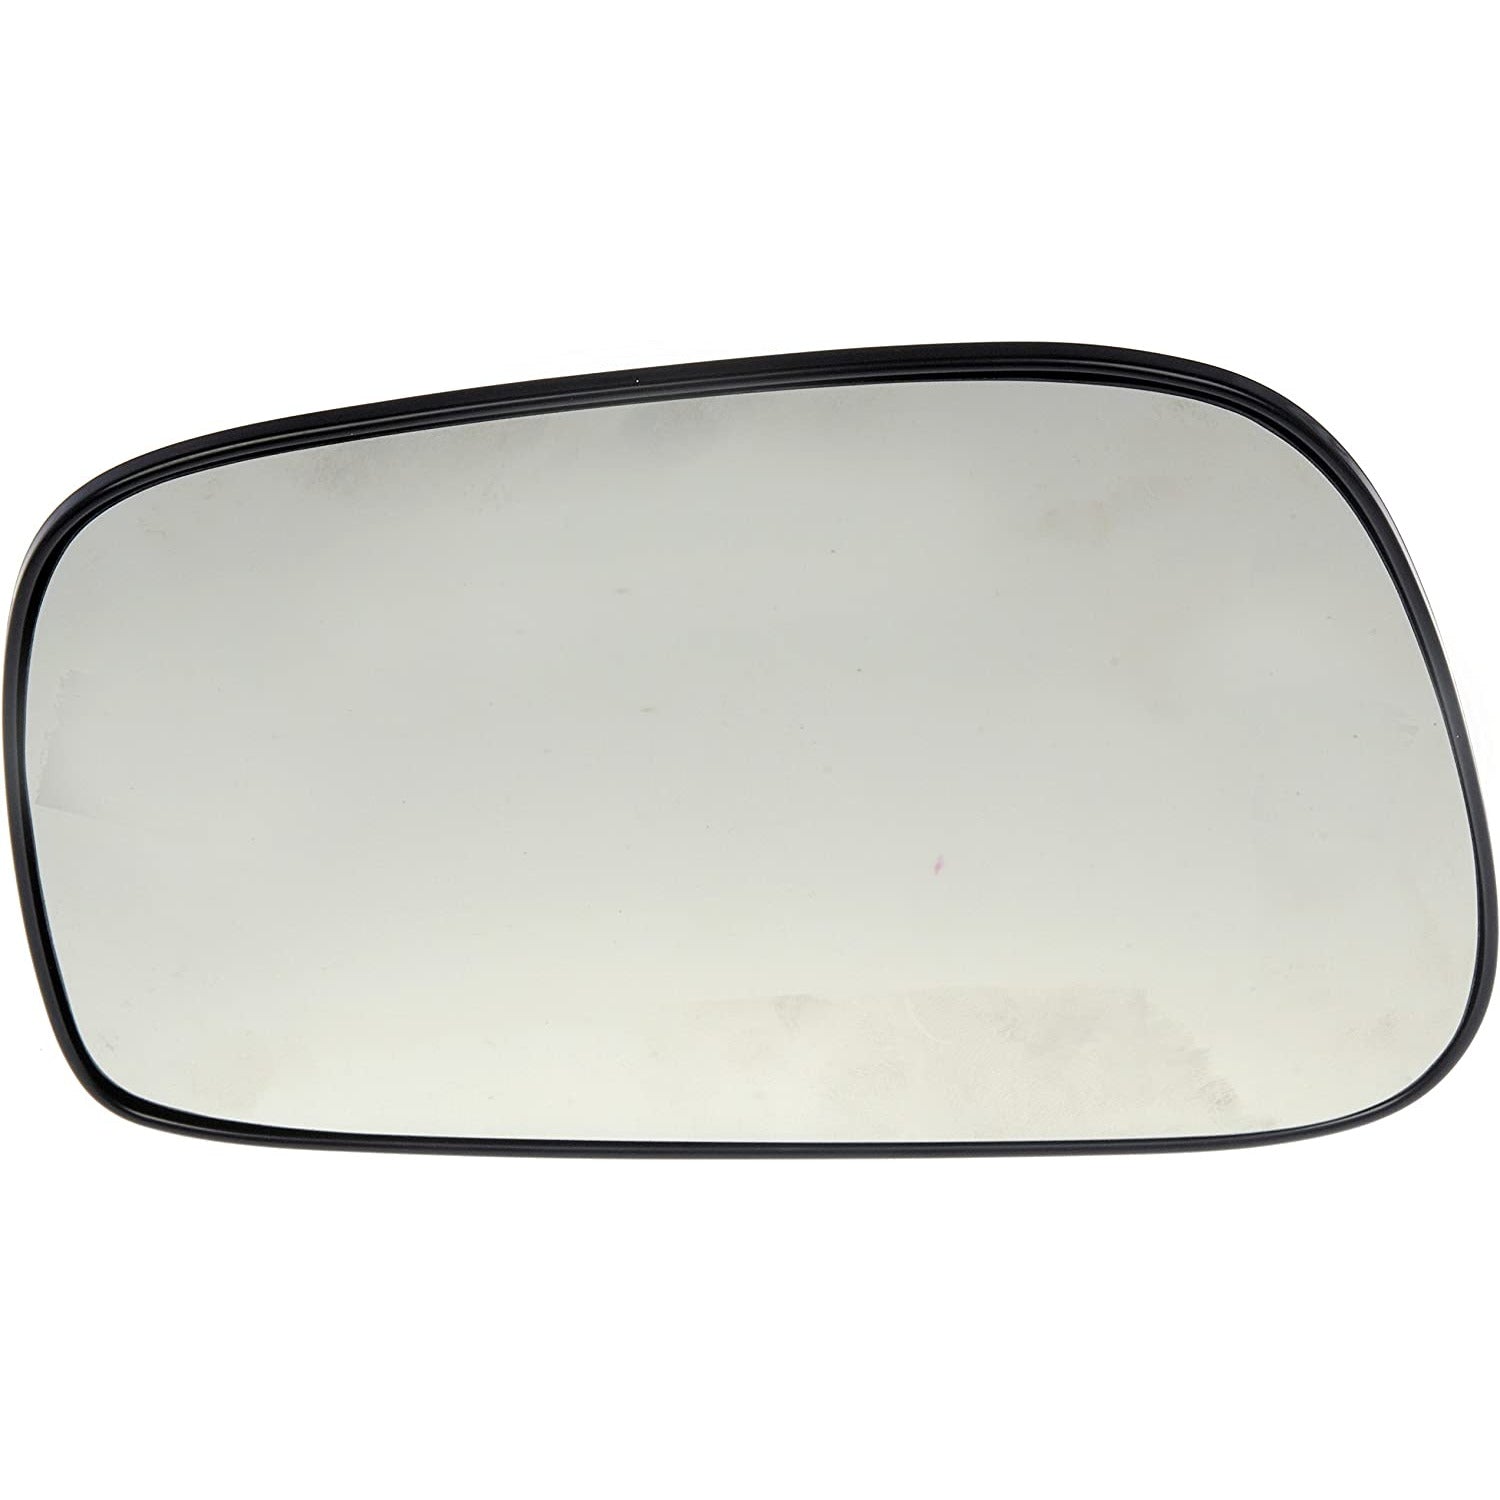 MTM 56405 Dorman Replacement Plastic-Backed Mirror Glass (Left, 02-08 Toyota Cars)